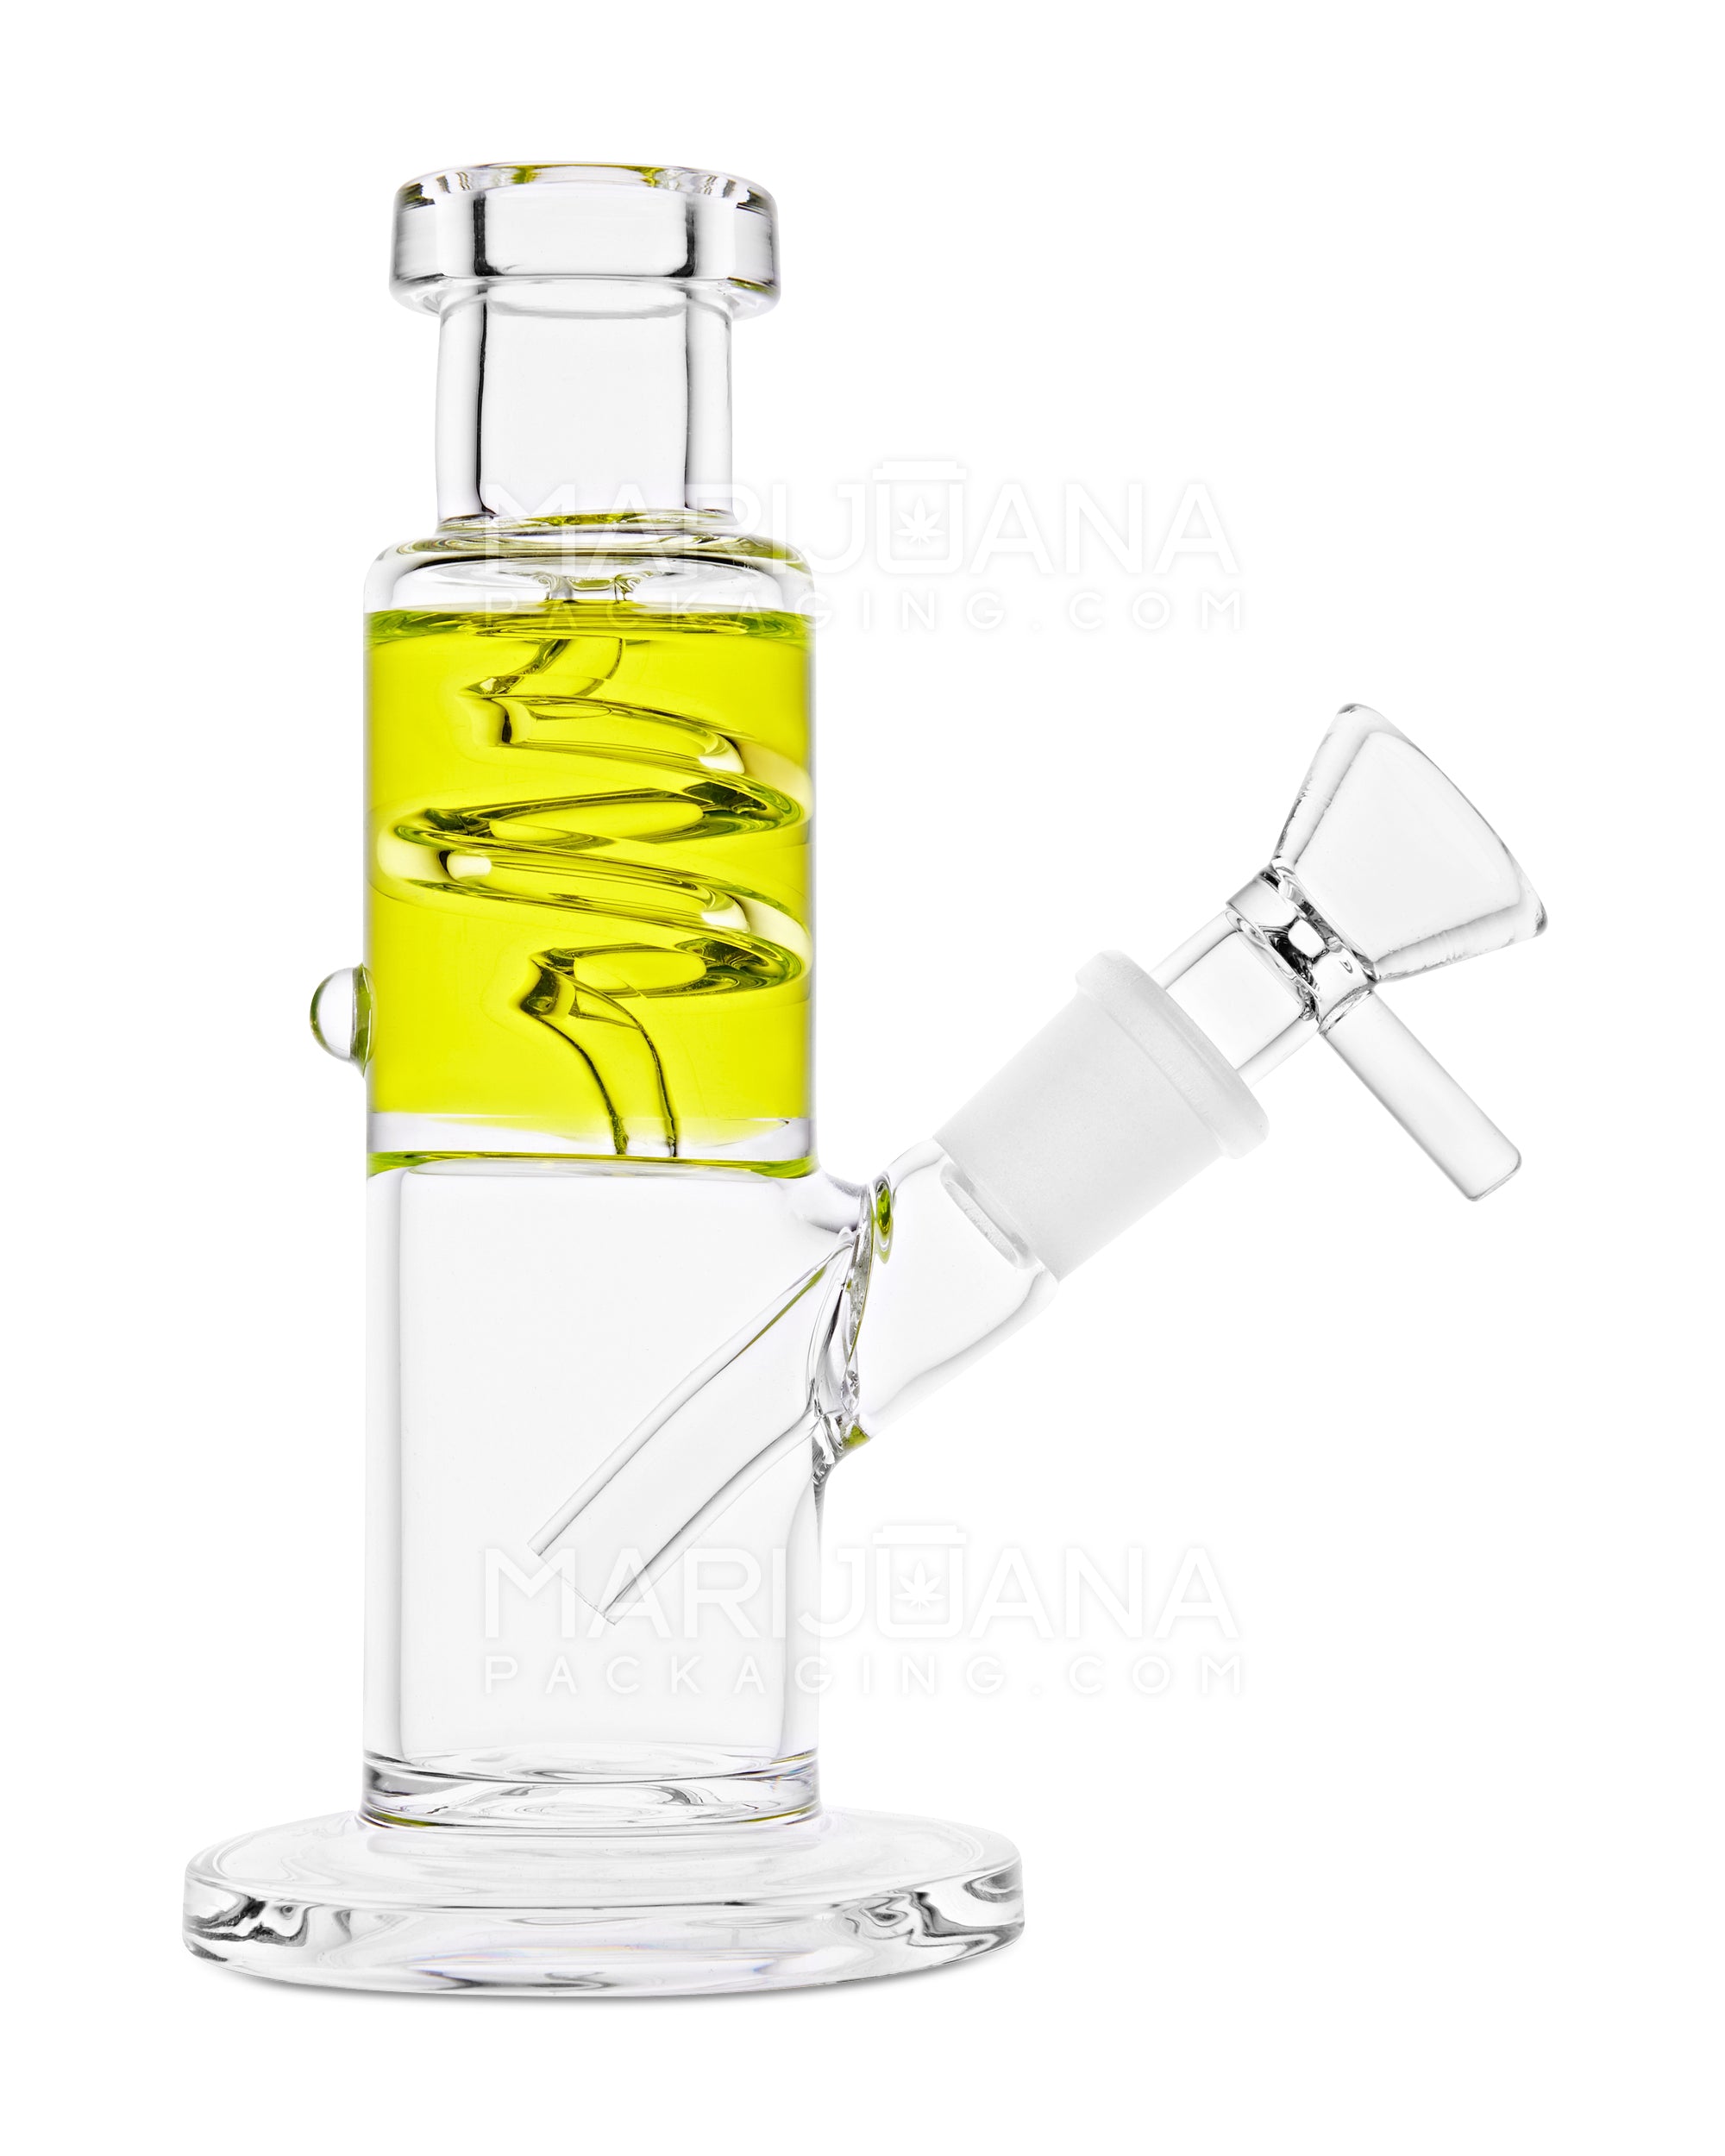 Glycerin Coil Mini Straight Tube Water Pipe | 6in Long - 14mm Bowl - Yellow